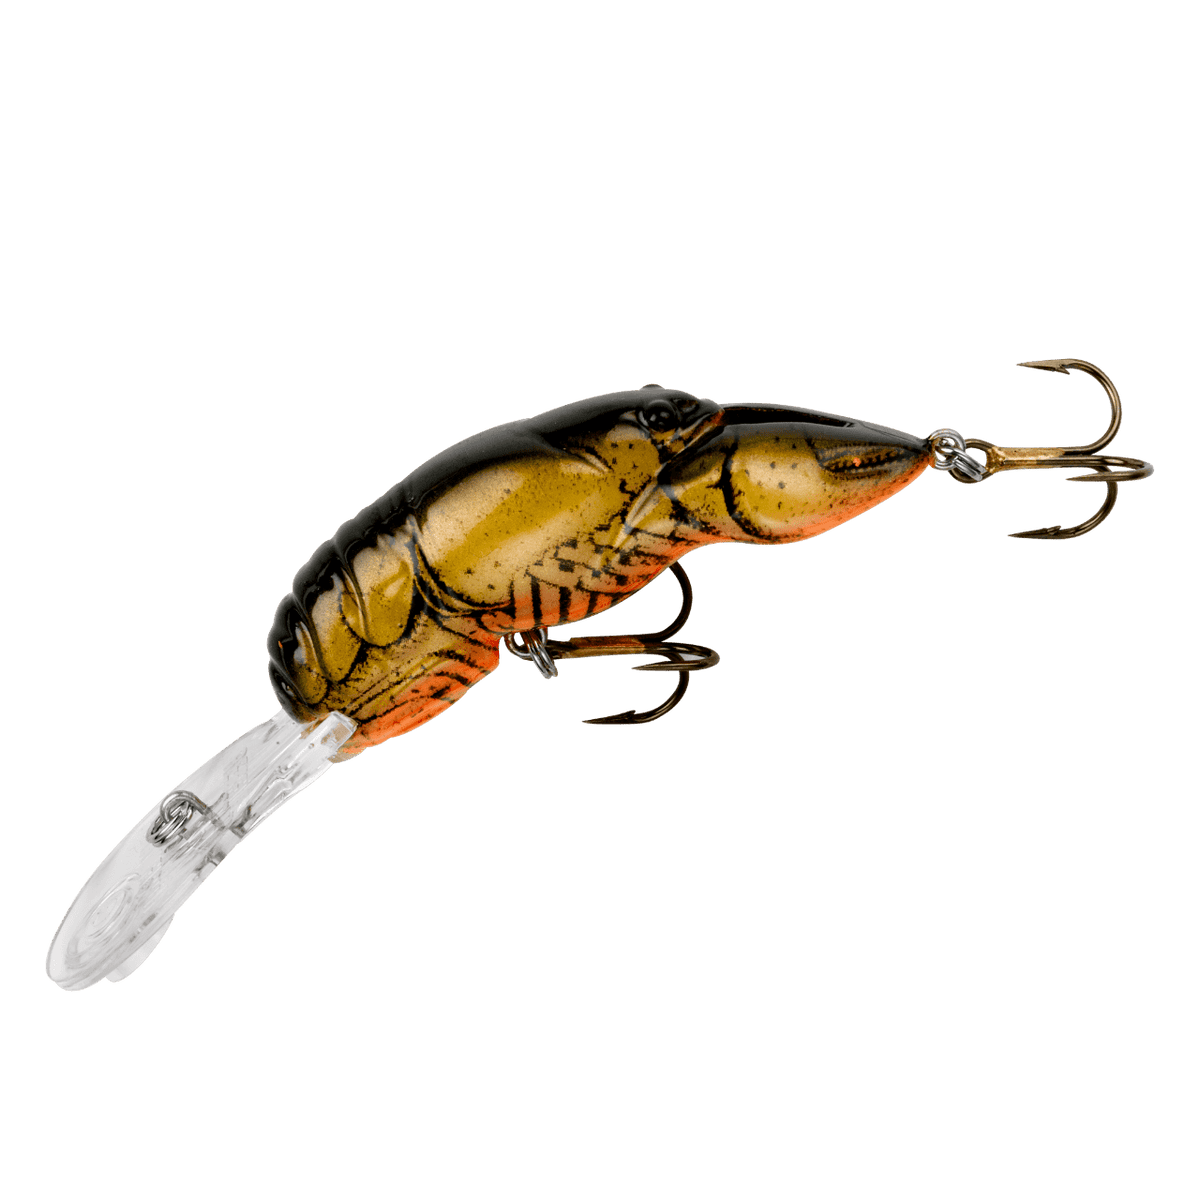 Rebel Lures Micro Critters Ultralight Crankbait Fishing Lure with Barbless  Hook, Stream Crawfish, Micro Craw : Sports & Outdoors 